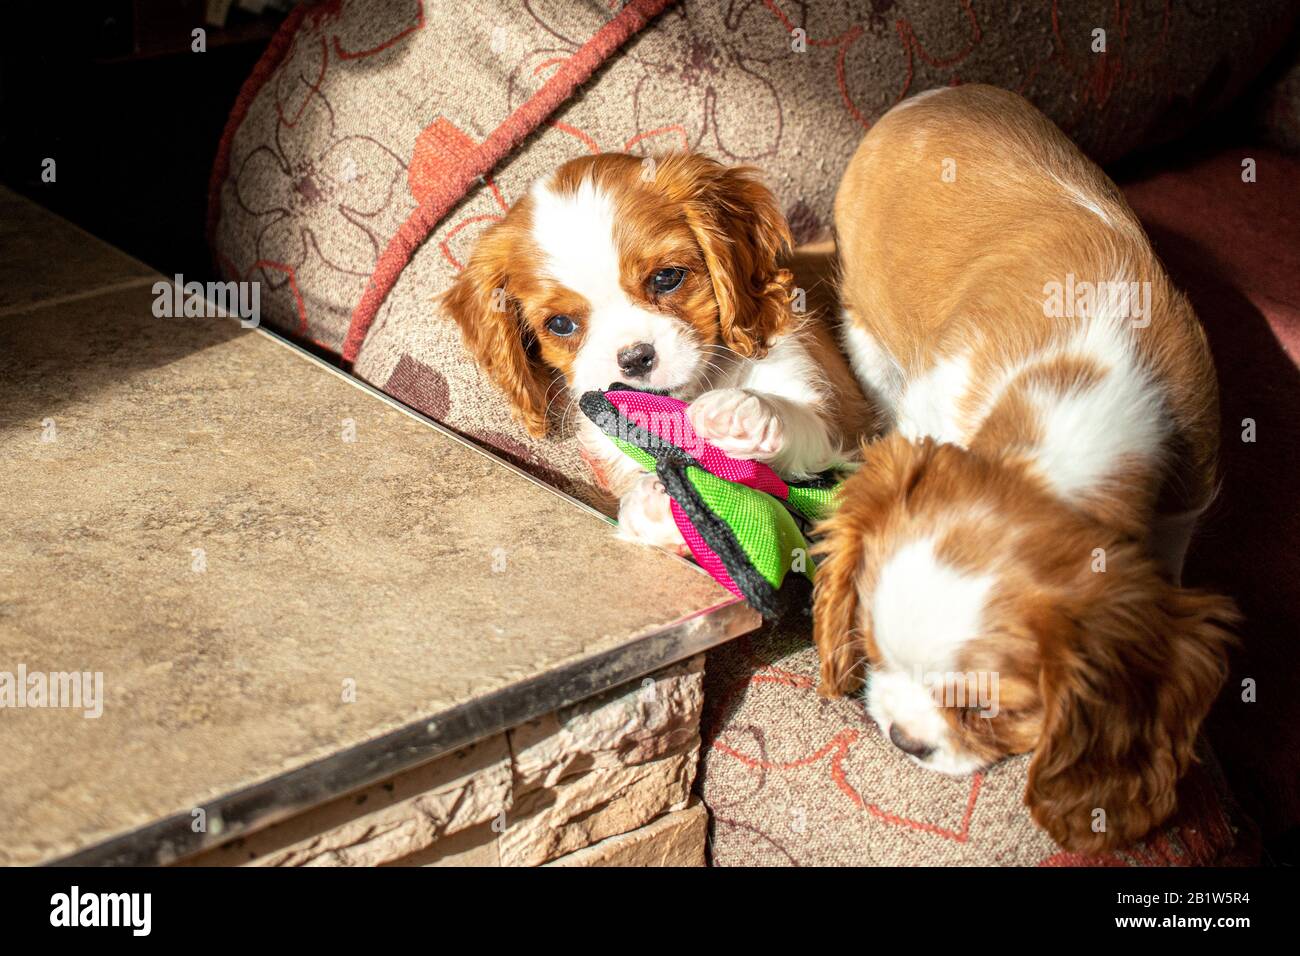 Two cute Blenheim Cavalier King Charles Spaniel puppies play in a dog bed, with one chewing on a toy. Stock Photo